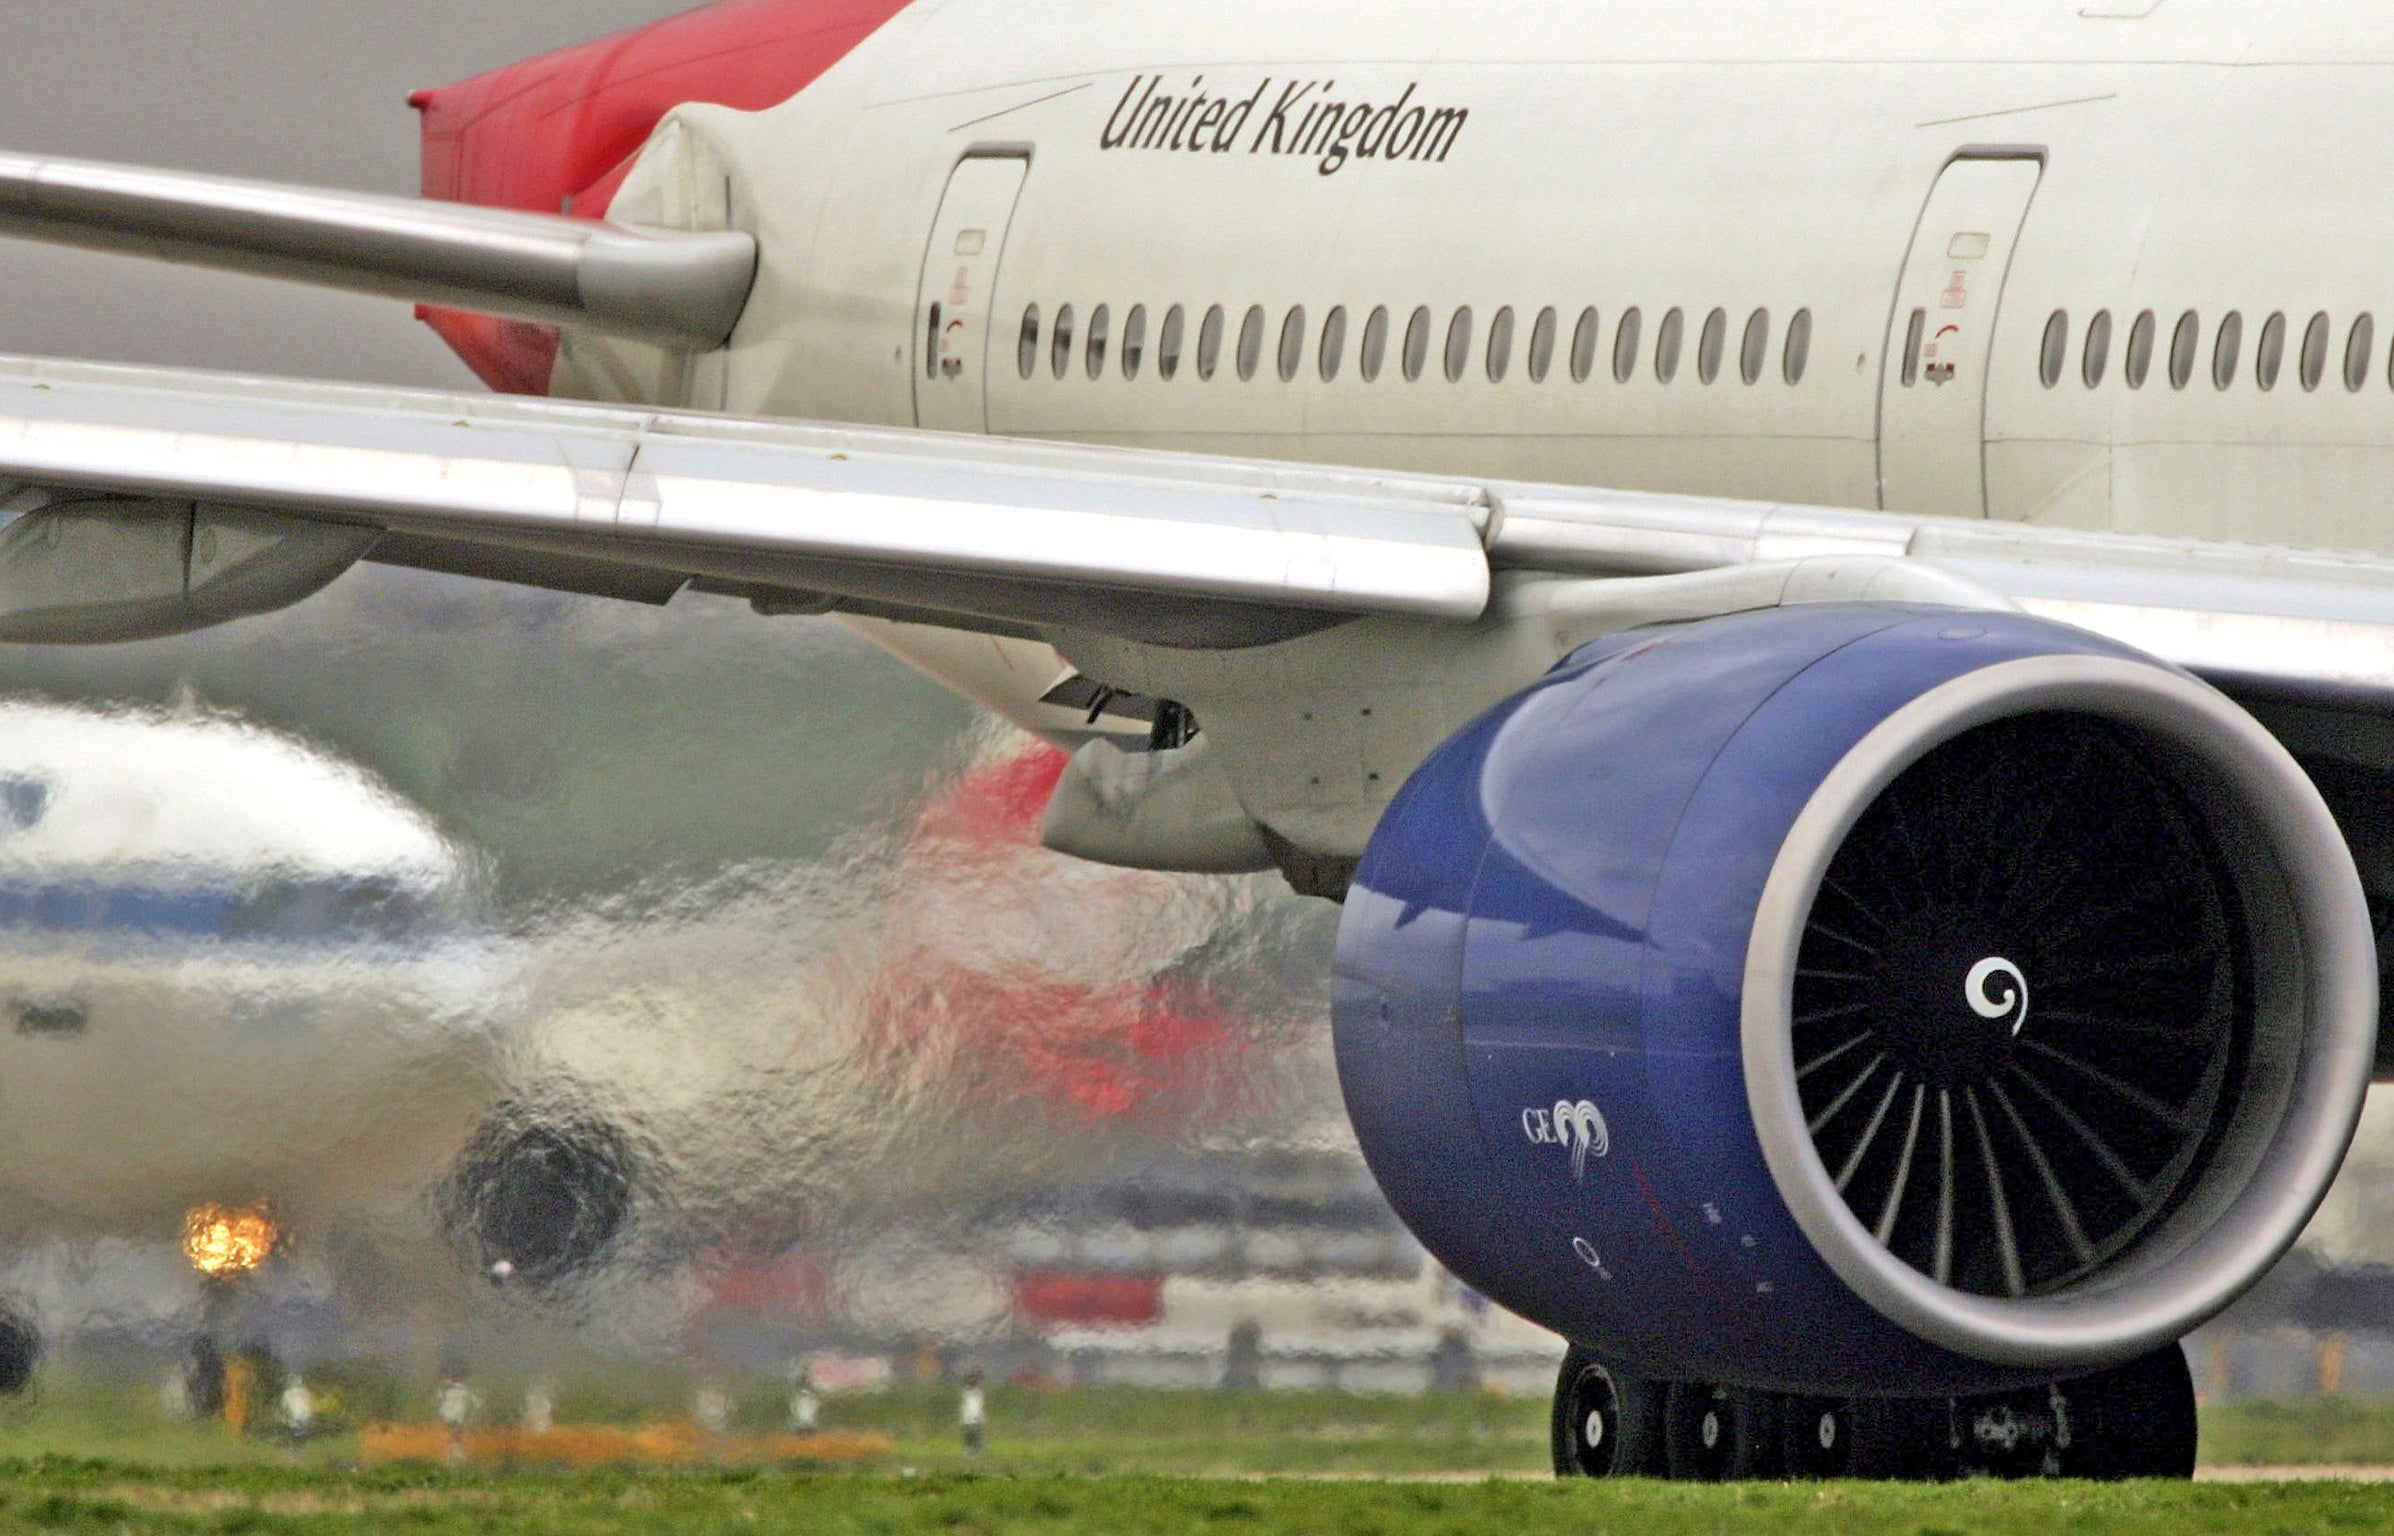 Exhaust emits from the engine of a passenger jet at Heathrow Airport